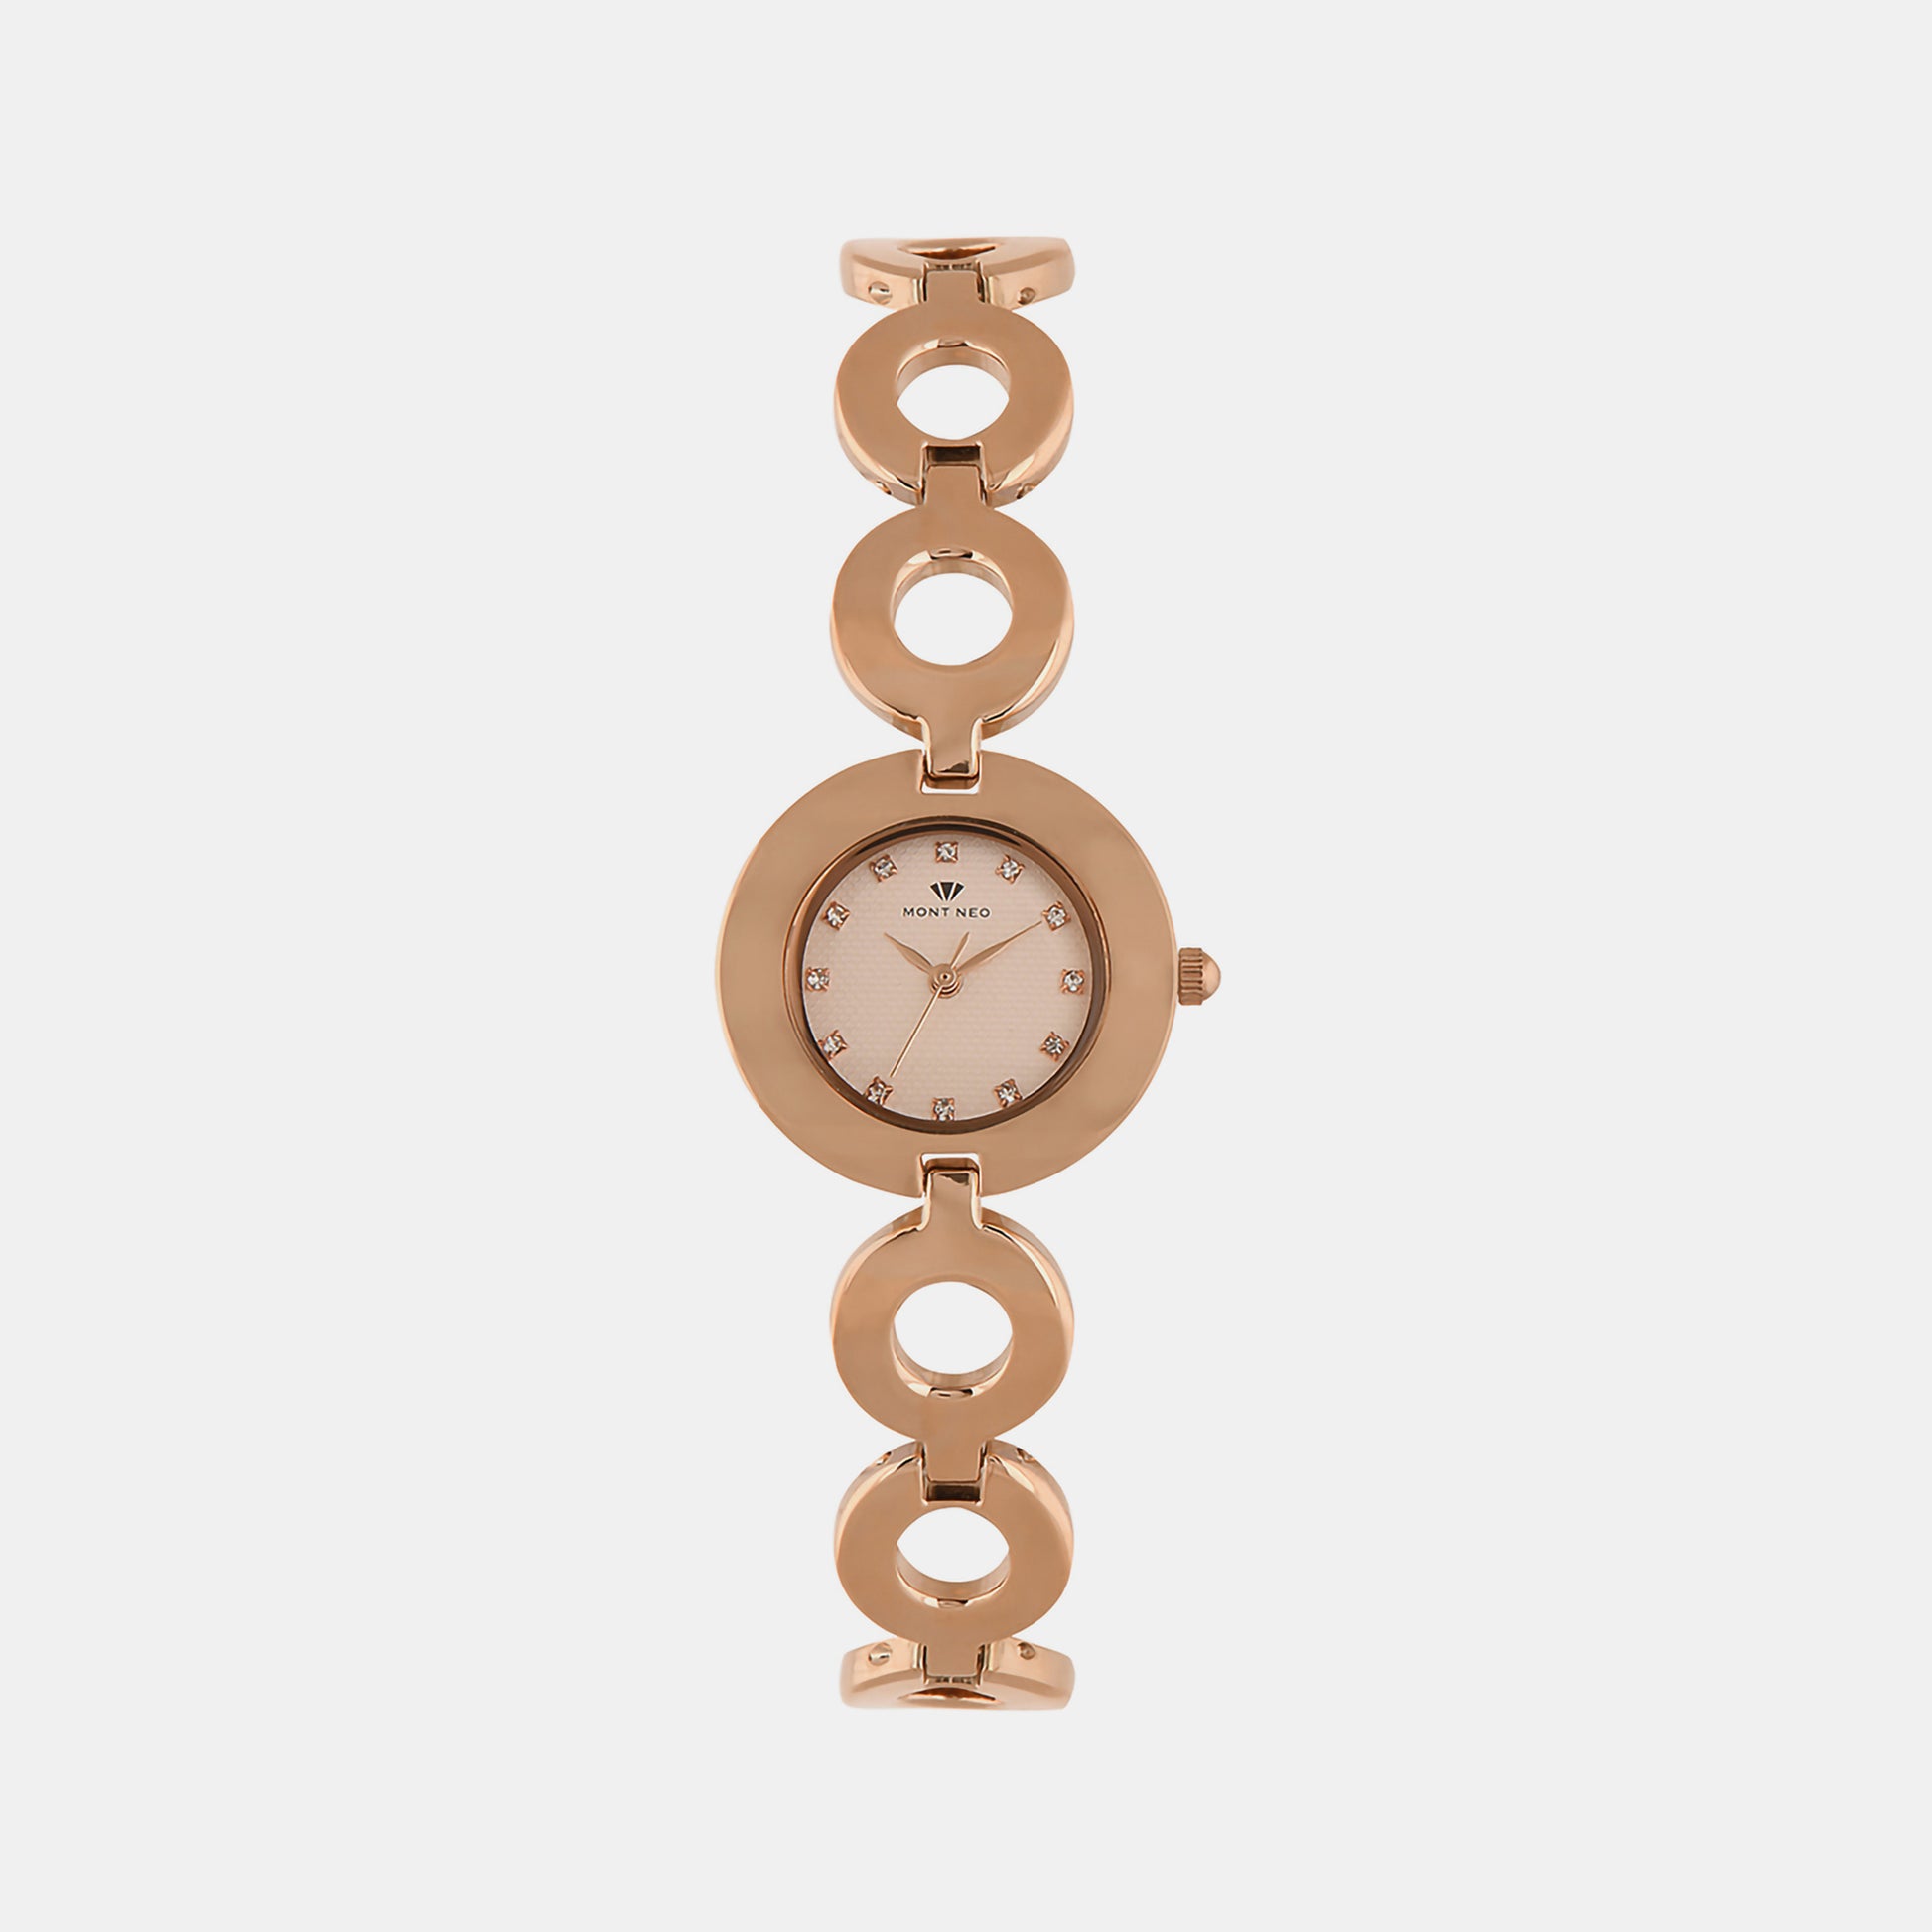 Female Rose Gold Analog Stainless Steel Watch 2015T-M3307